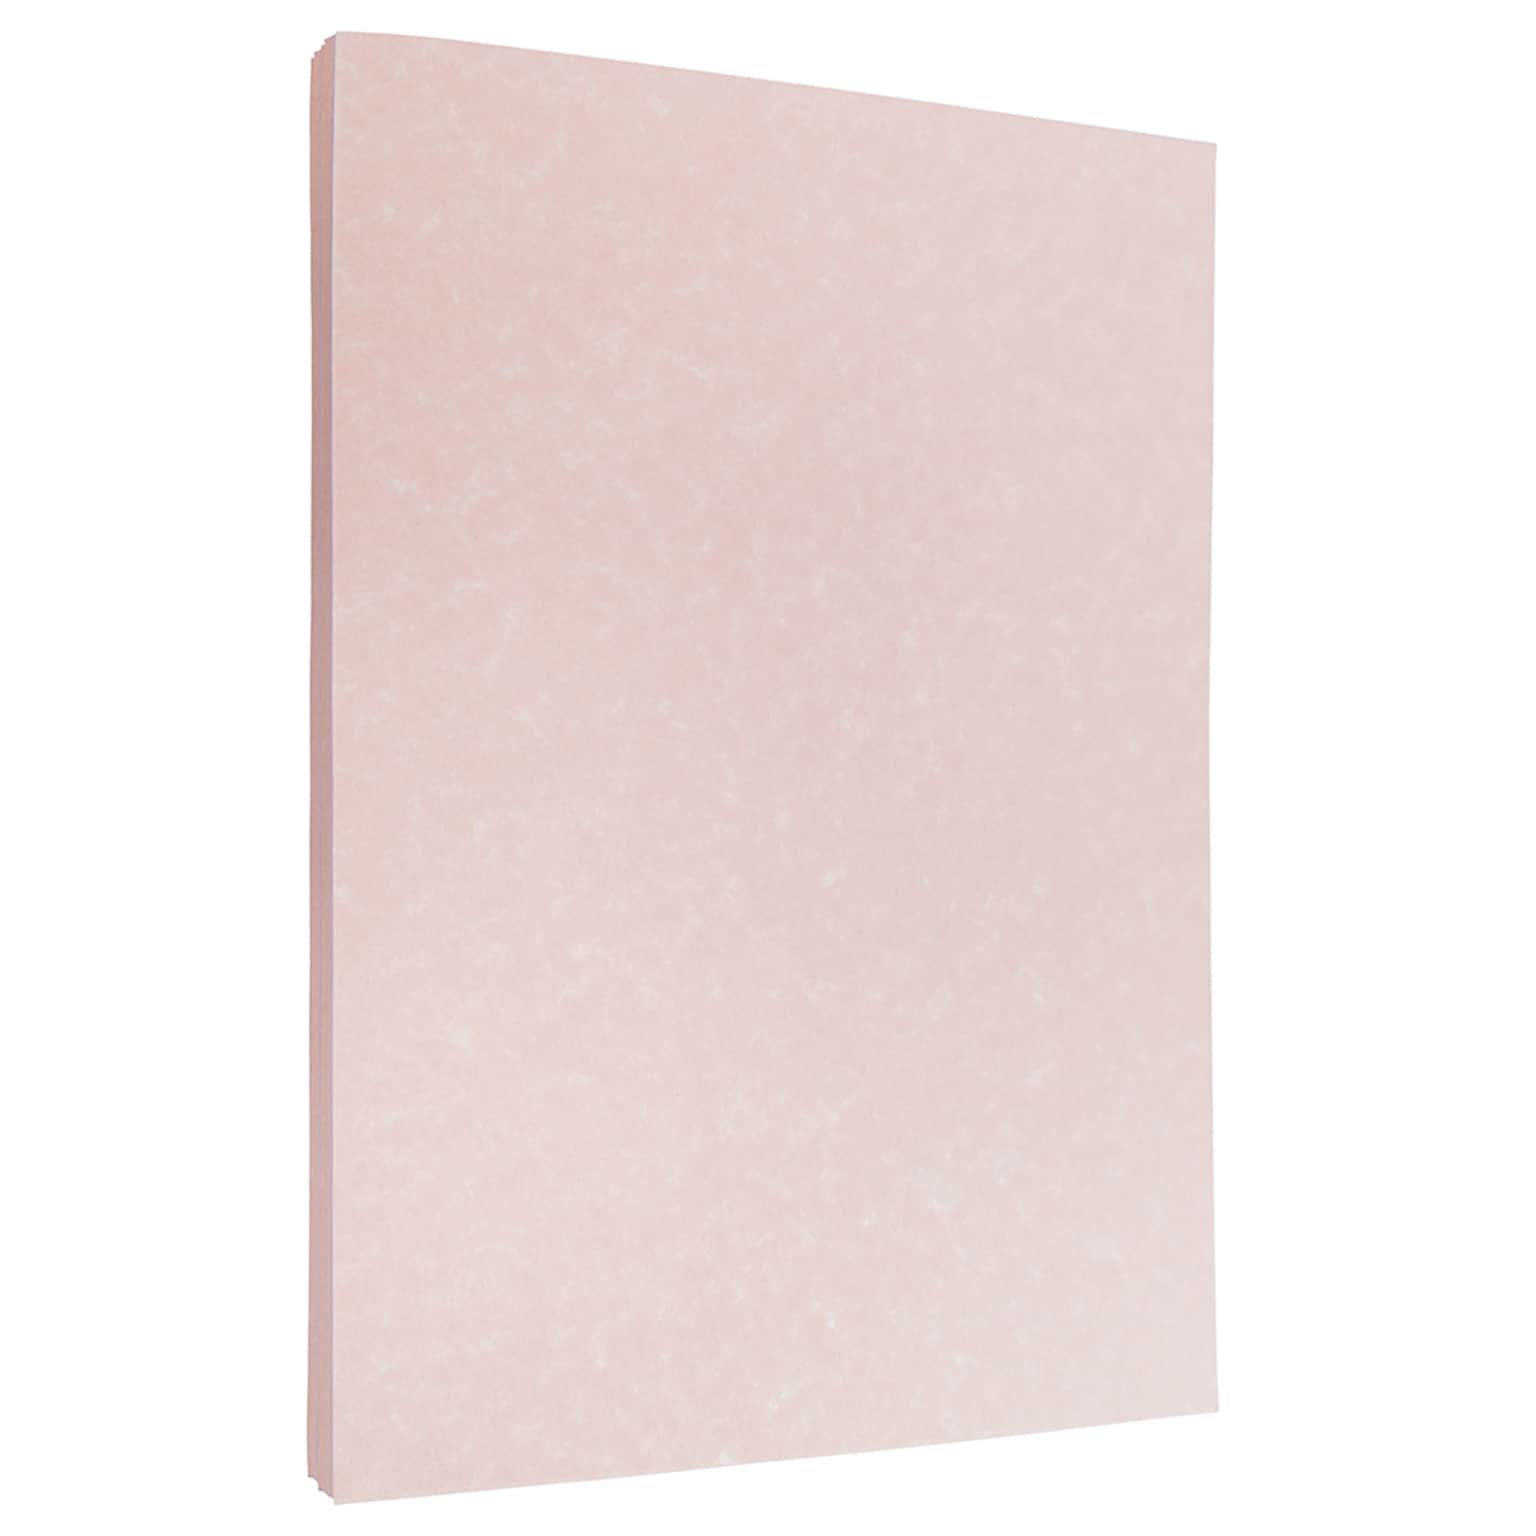 JAM Paper 30% Recycled Parchment Colored Paper, 24 lb., 8.5 x 11, Salmon Pink, 100 Sheets/Pack (17137622)